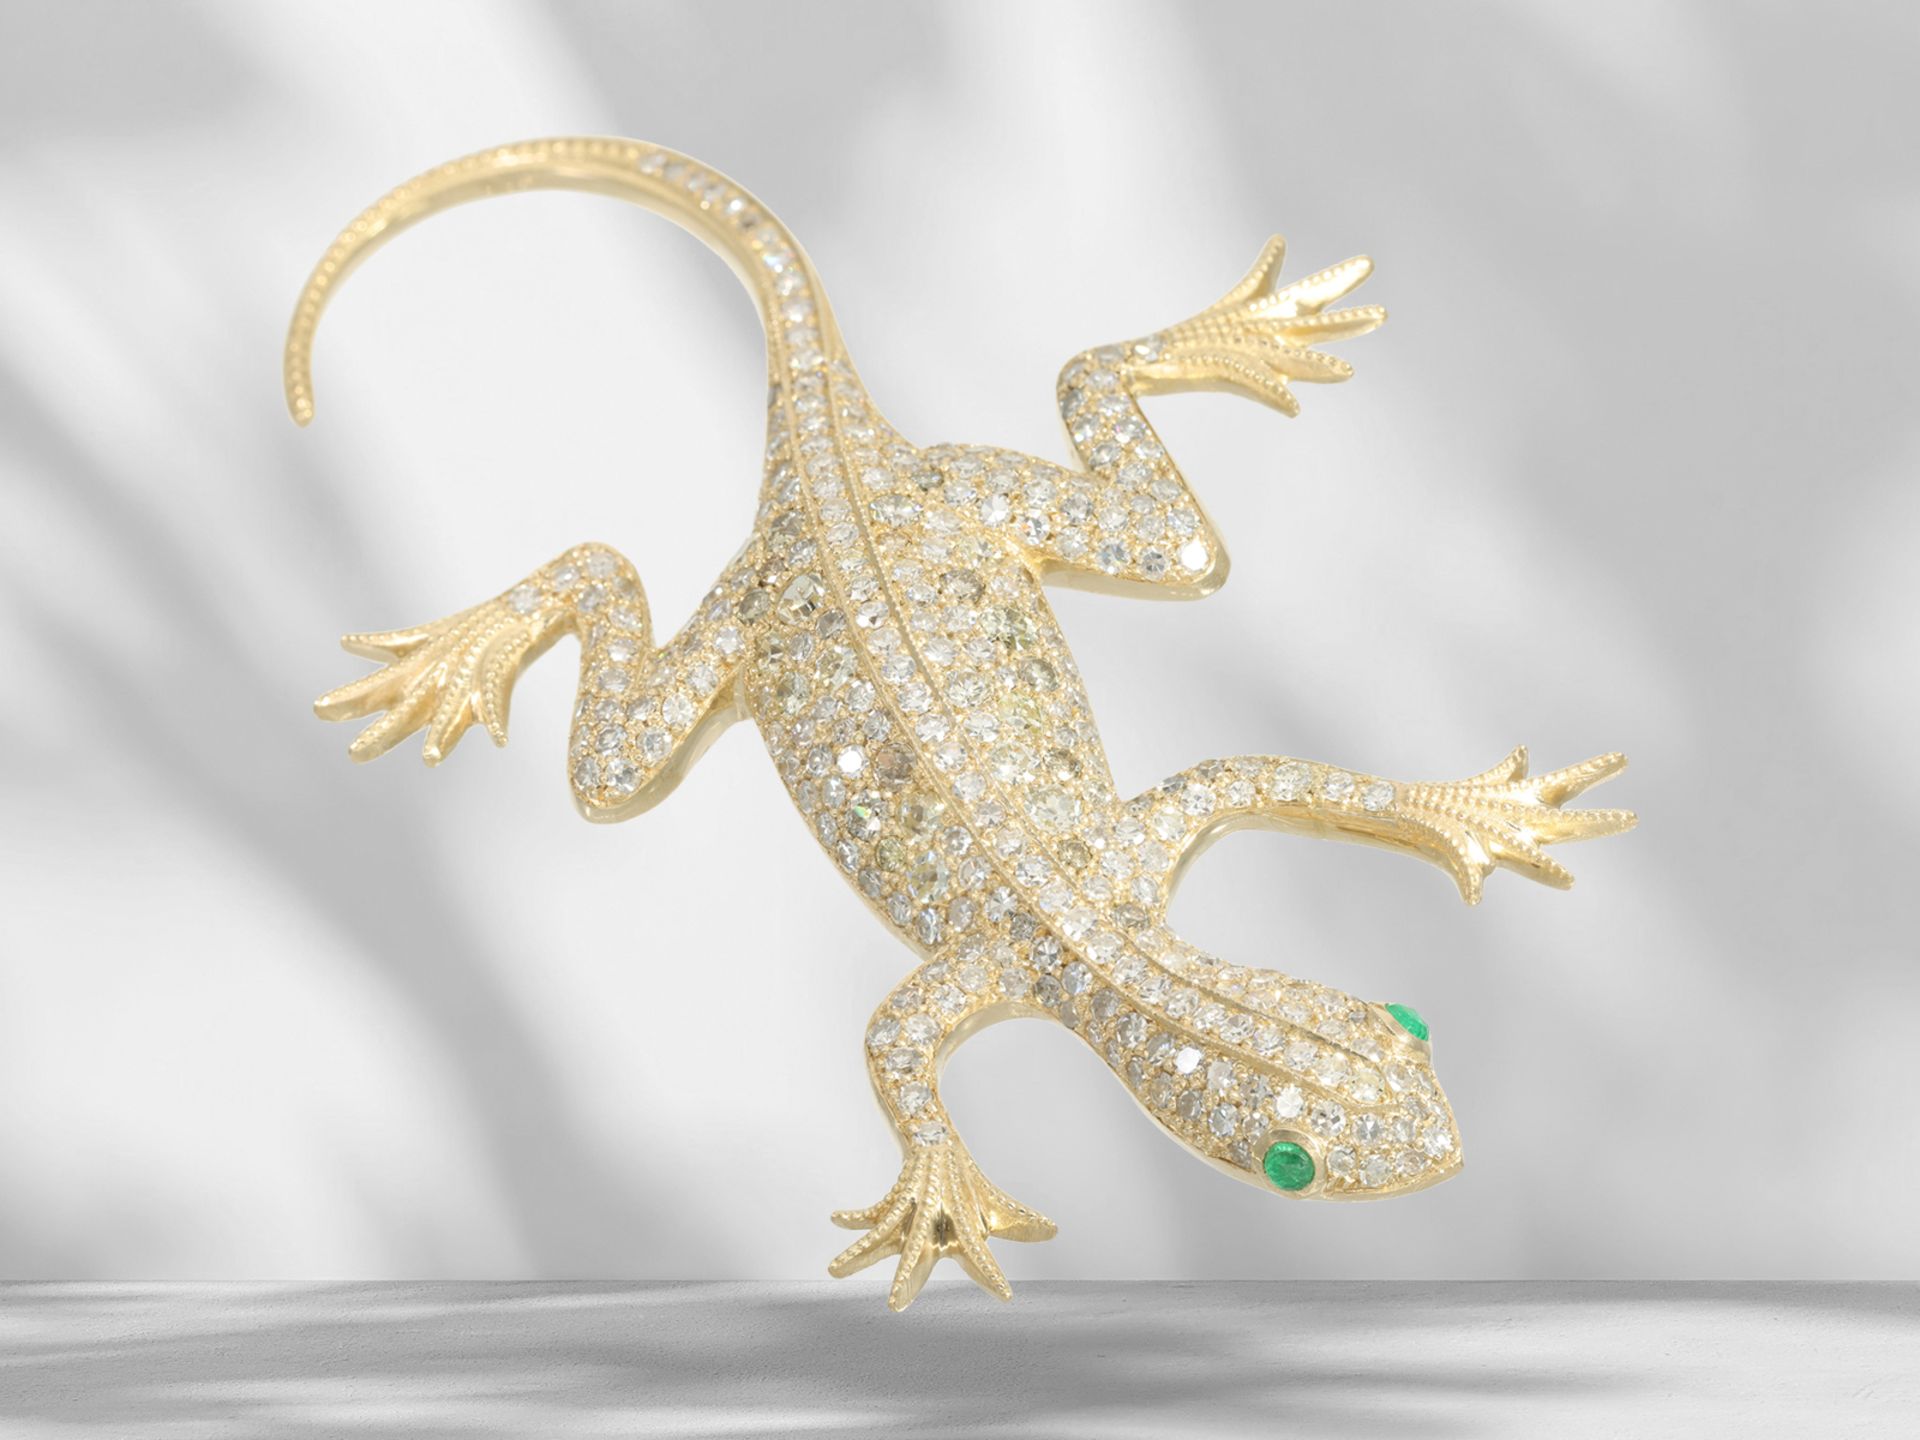 Designer brooch with emerald and diamond setting "Salamander" motif, approx. 5ct, Russian gold punch - Image 4 of 4